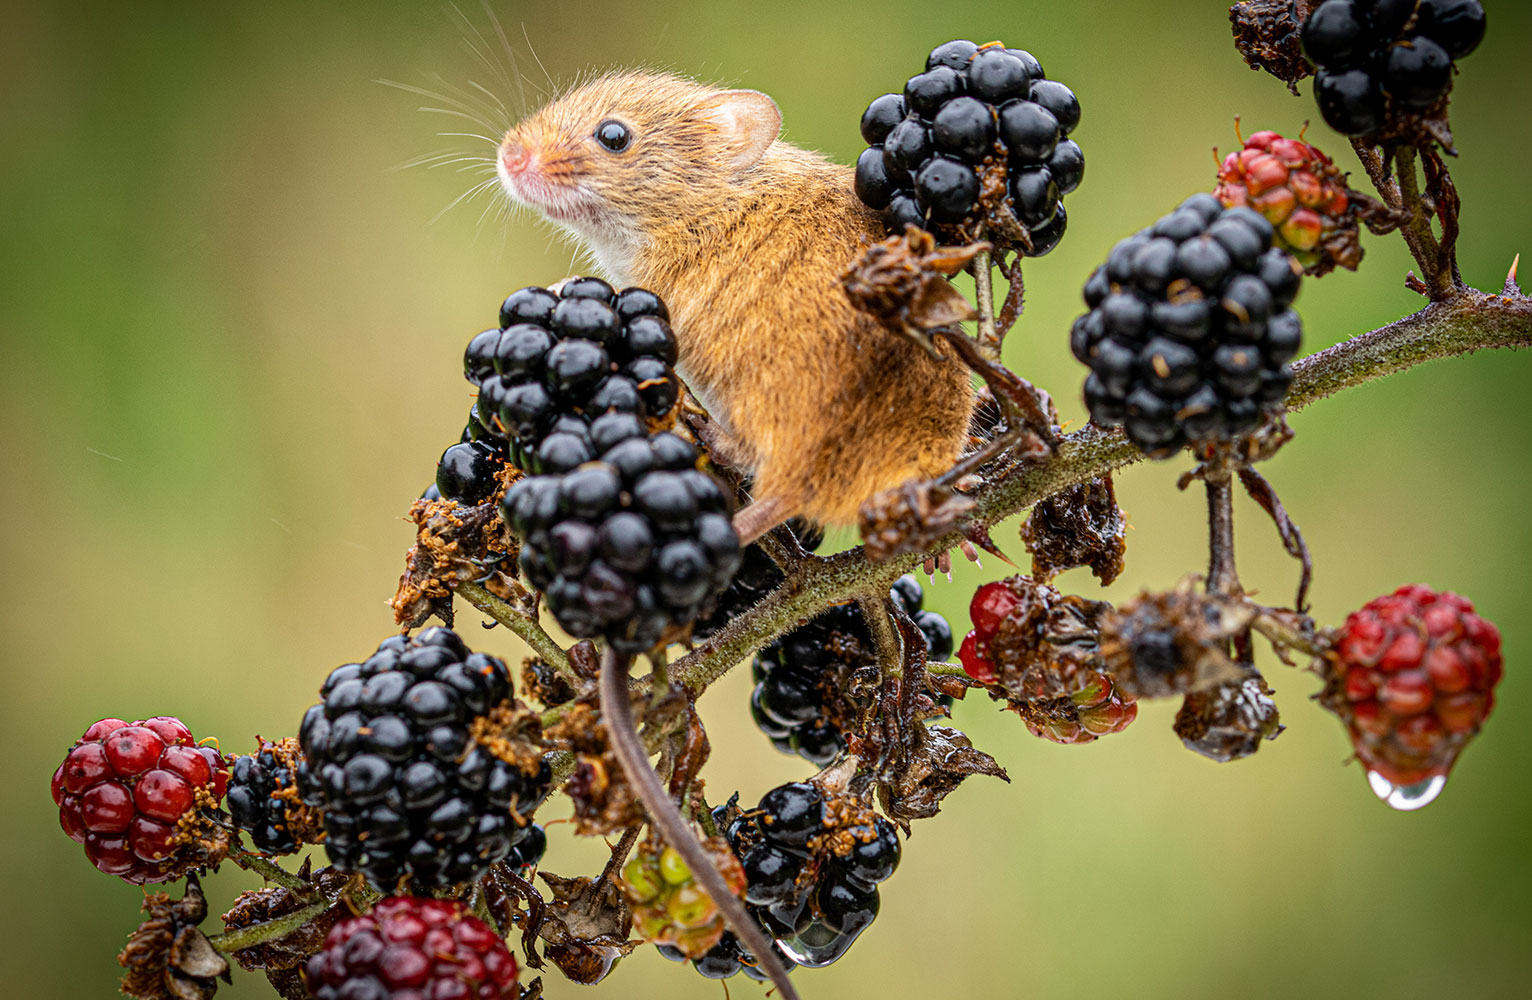 A harvest mouse perches on a branch of blackberries.